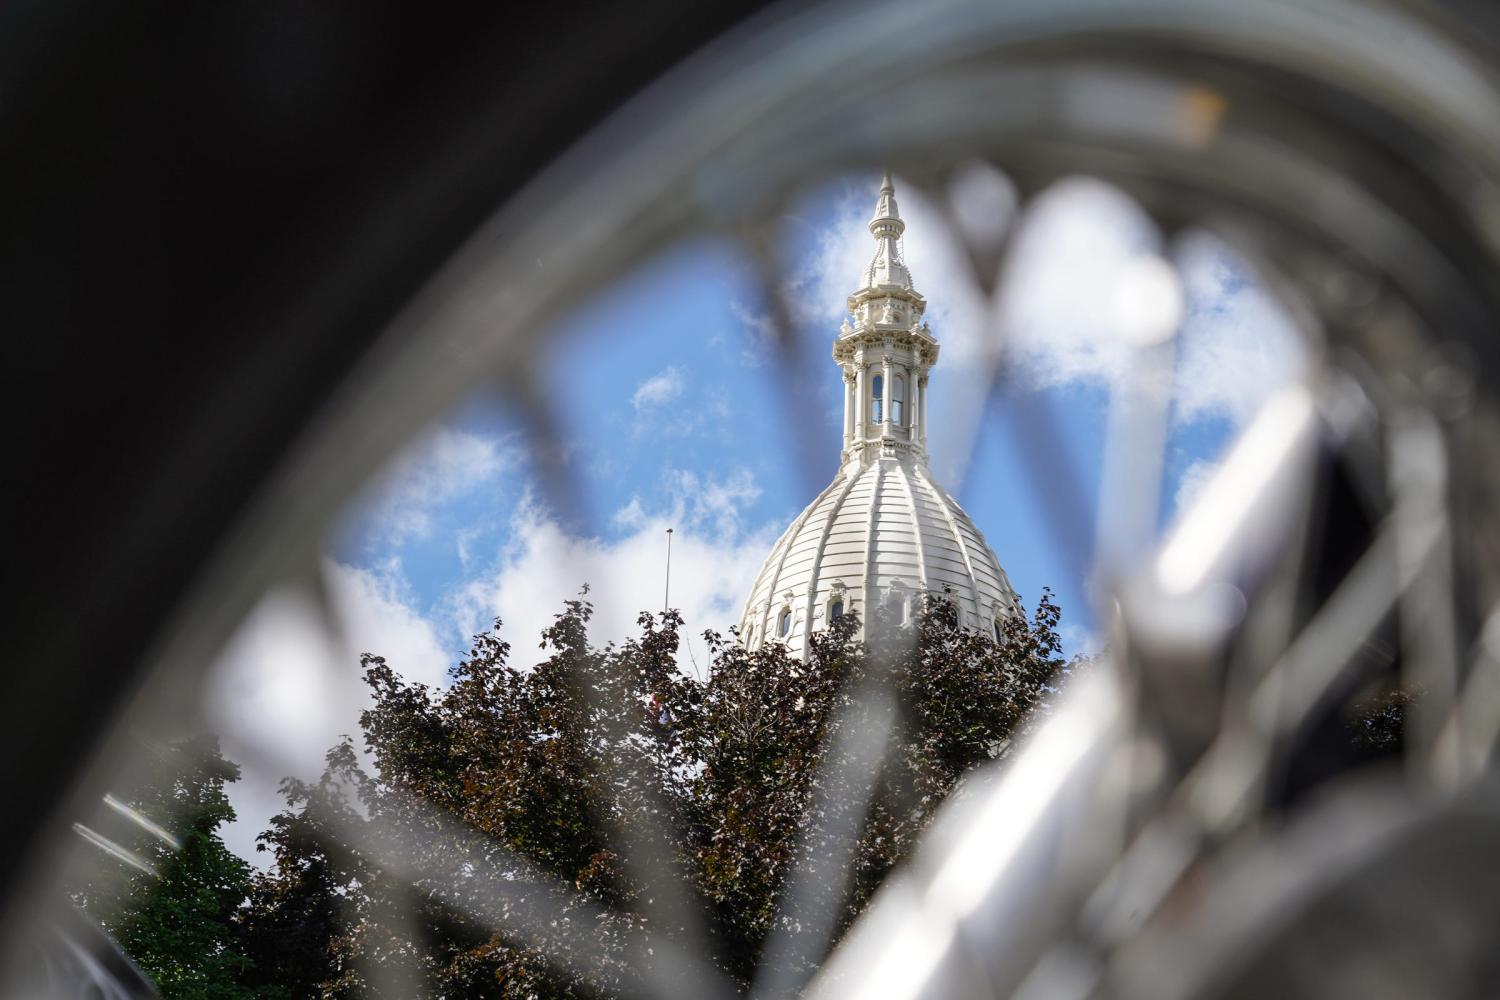 The Michigan State Capitol building is seen through the spokes of a motorcycle during the ABATE of Michigan Annual Freedom Rally outside of the Michigan State Capitol building in Lansing on Sept. 29, 2020. Bikers gathered to speak on behalf of motorcyclists who want changes to the recent auto insurance reform law that puts motorcyclists at a disadvantage.